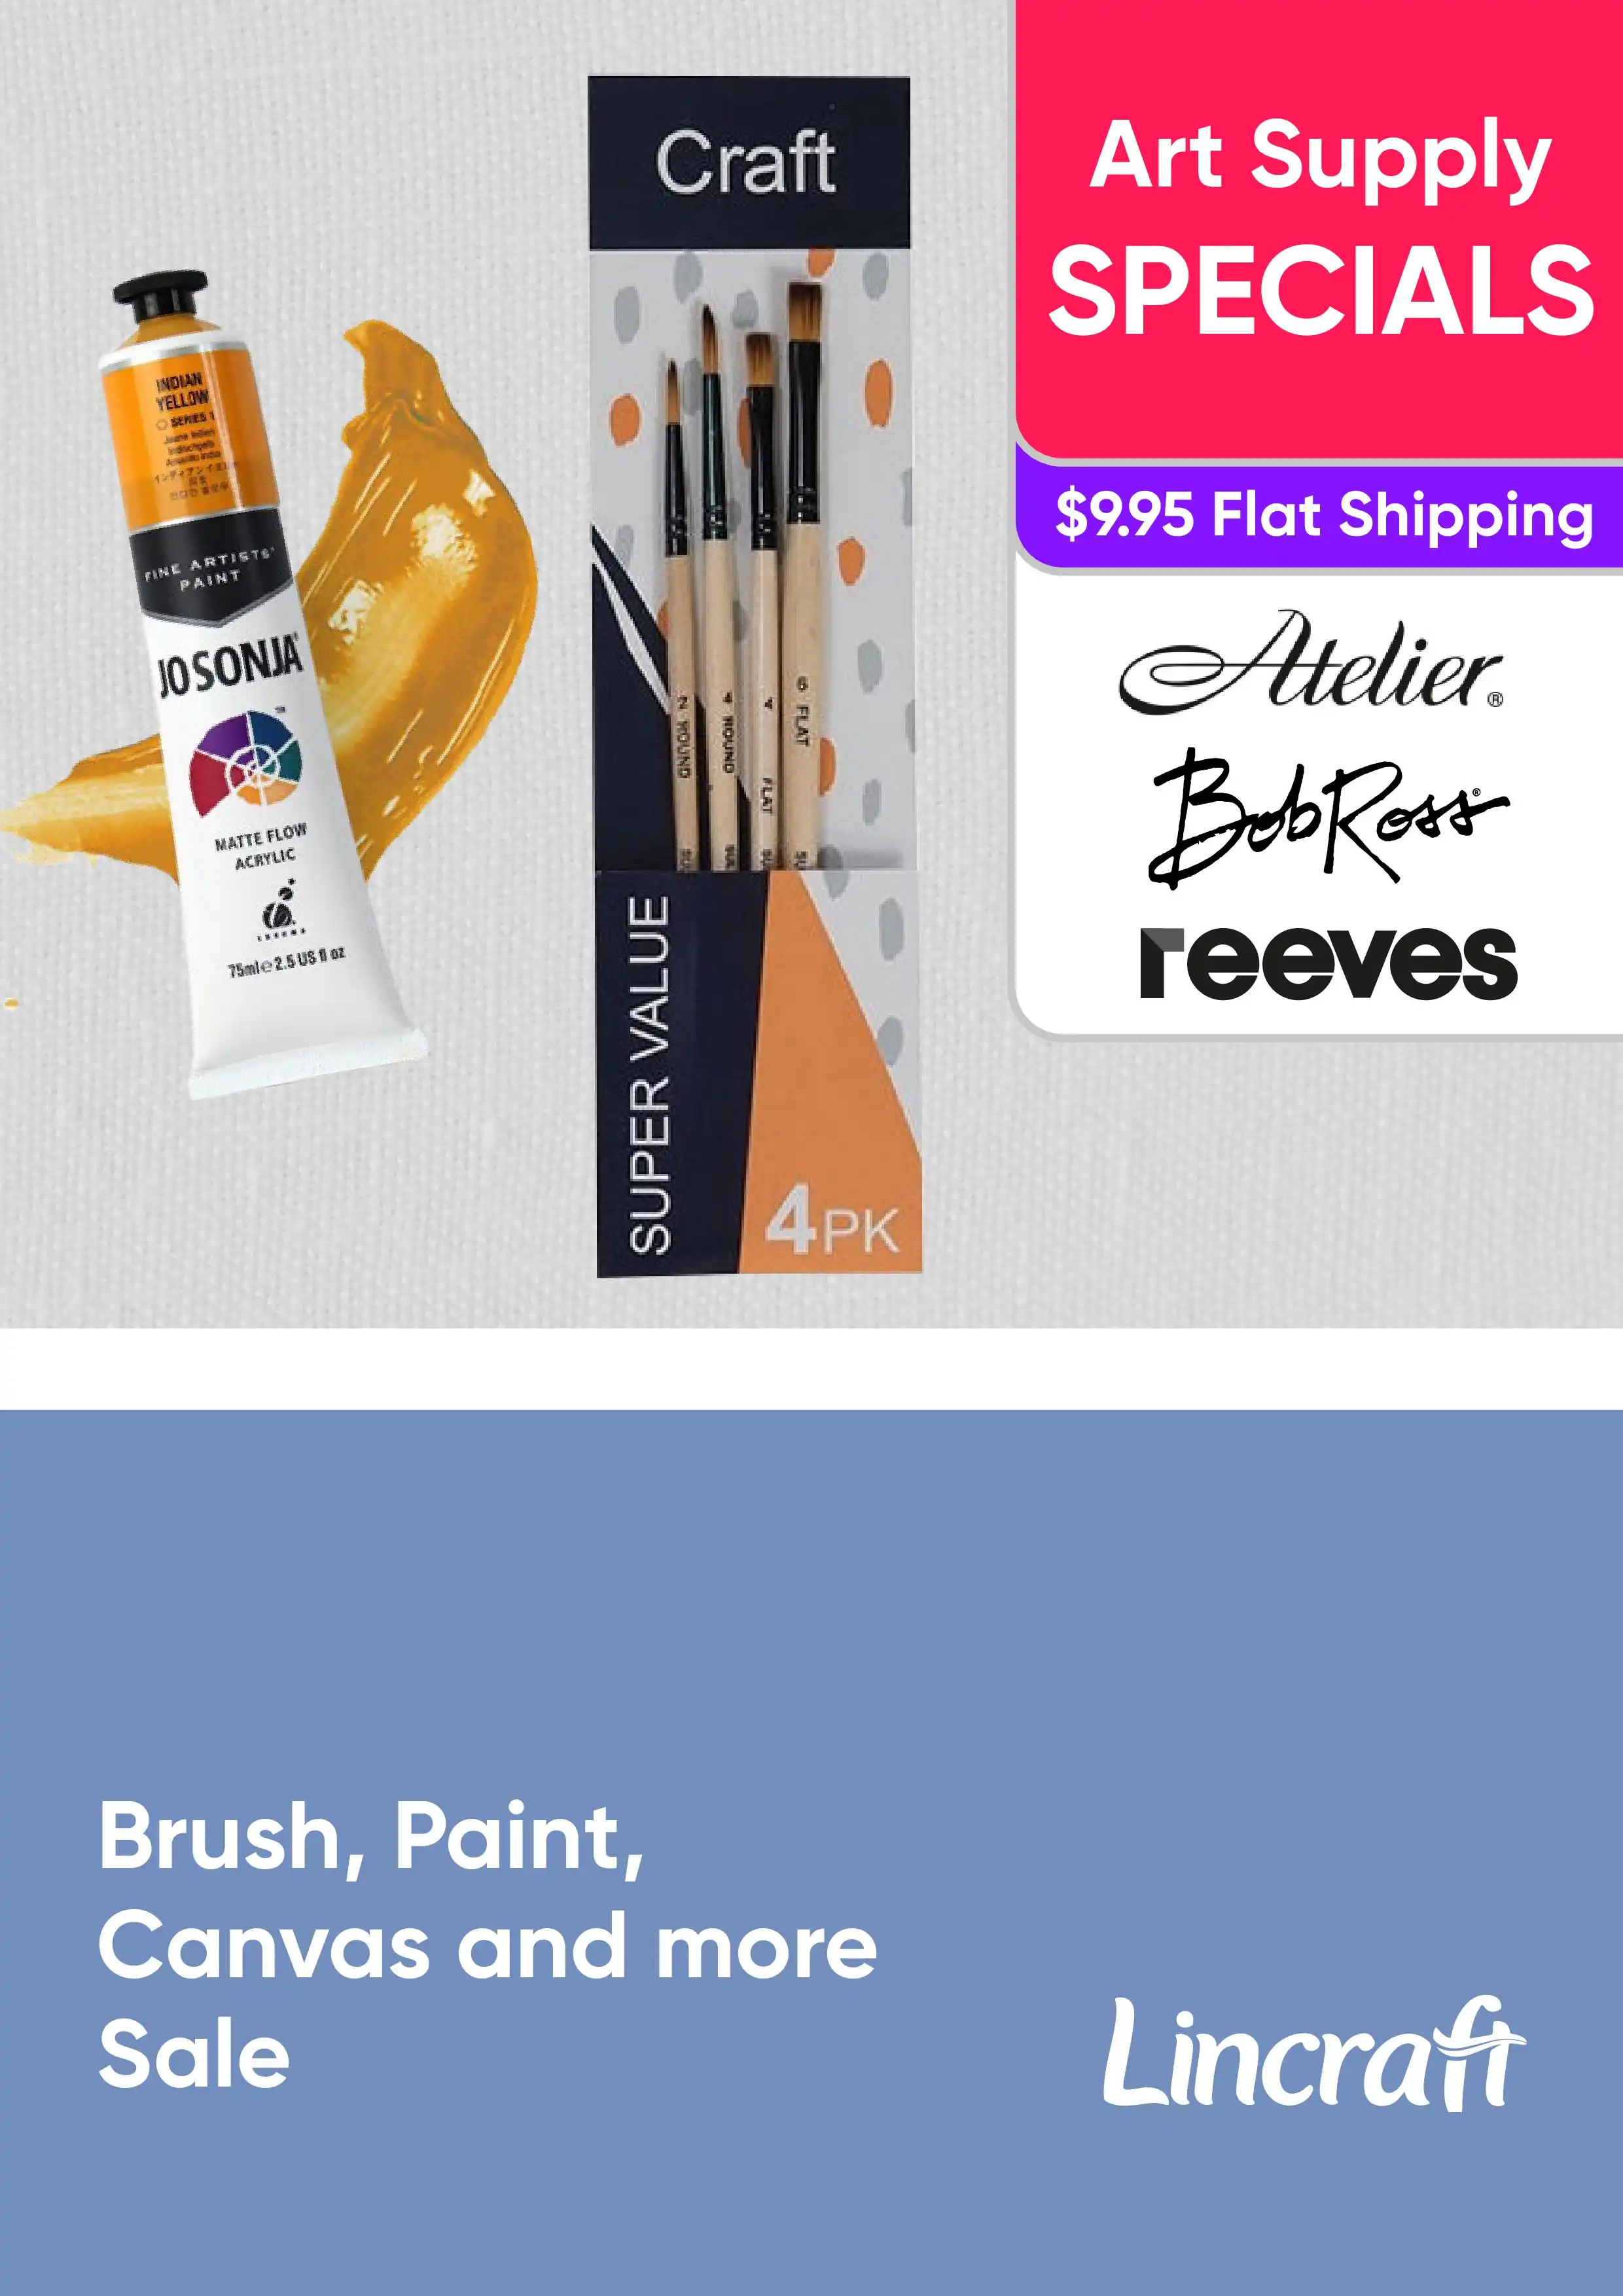 Art Supply Specials - Brushes, Paint, Canvas and More - Sullivans, Reeves